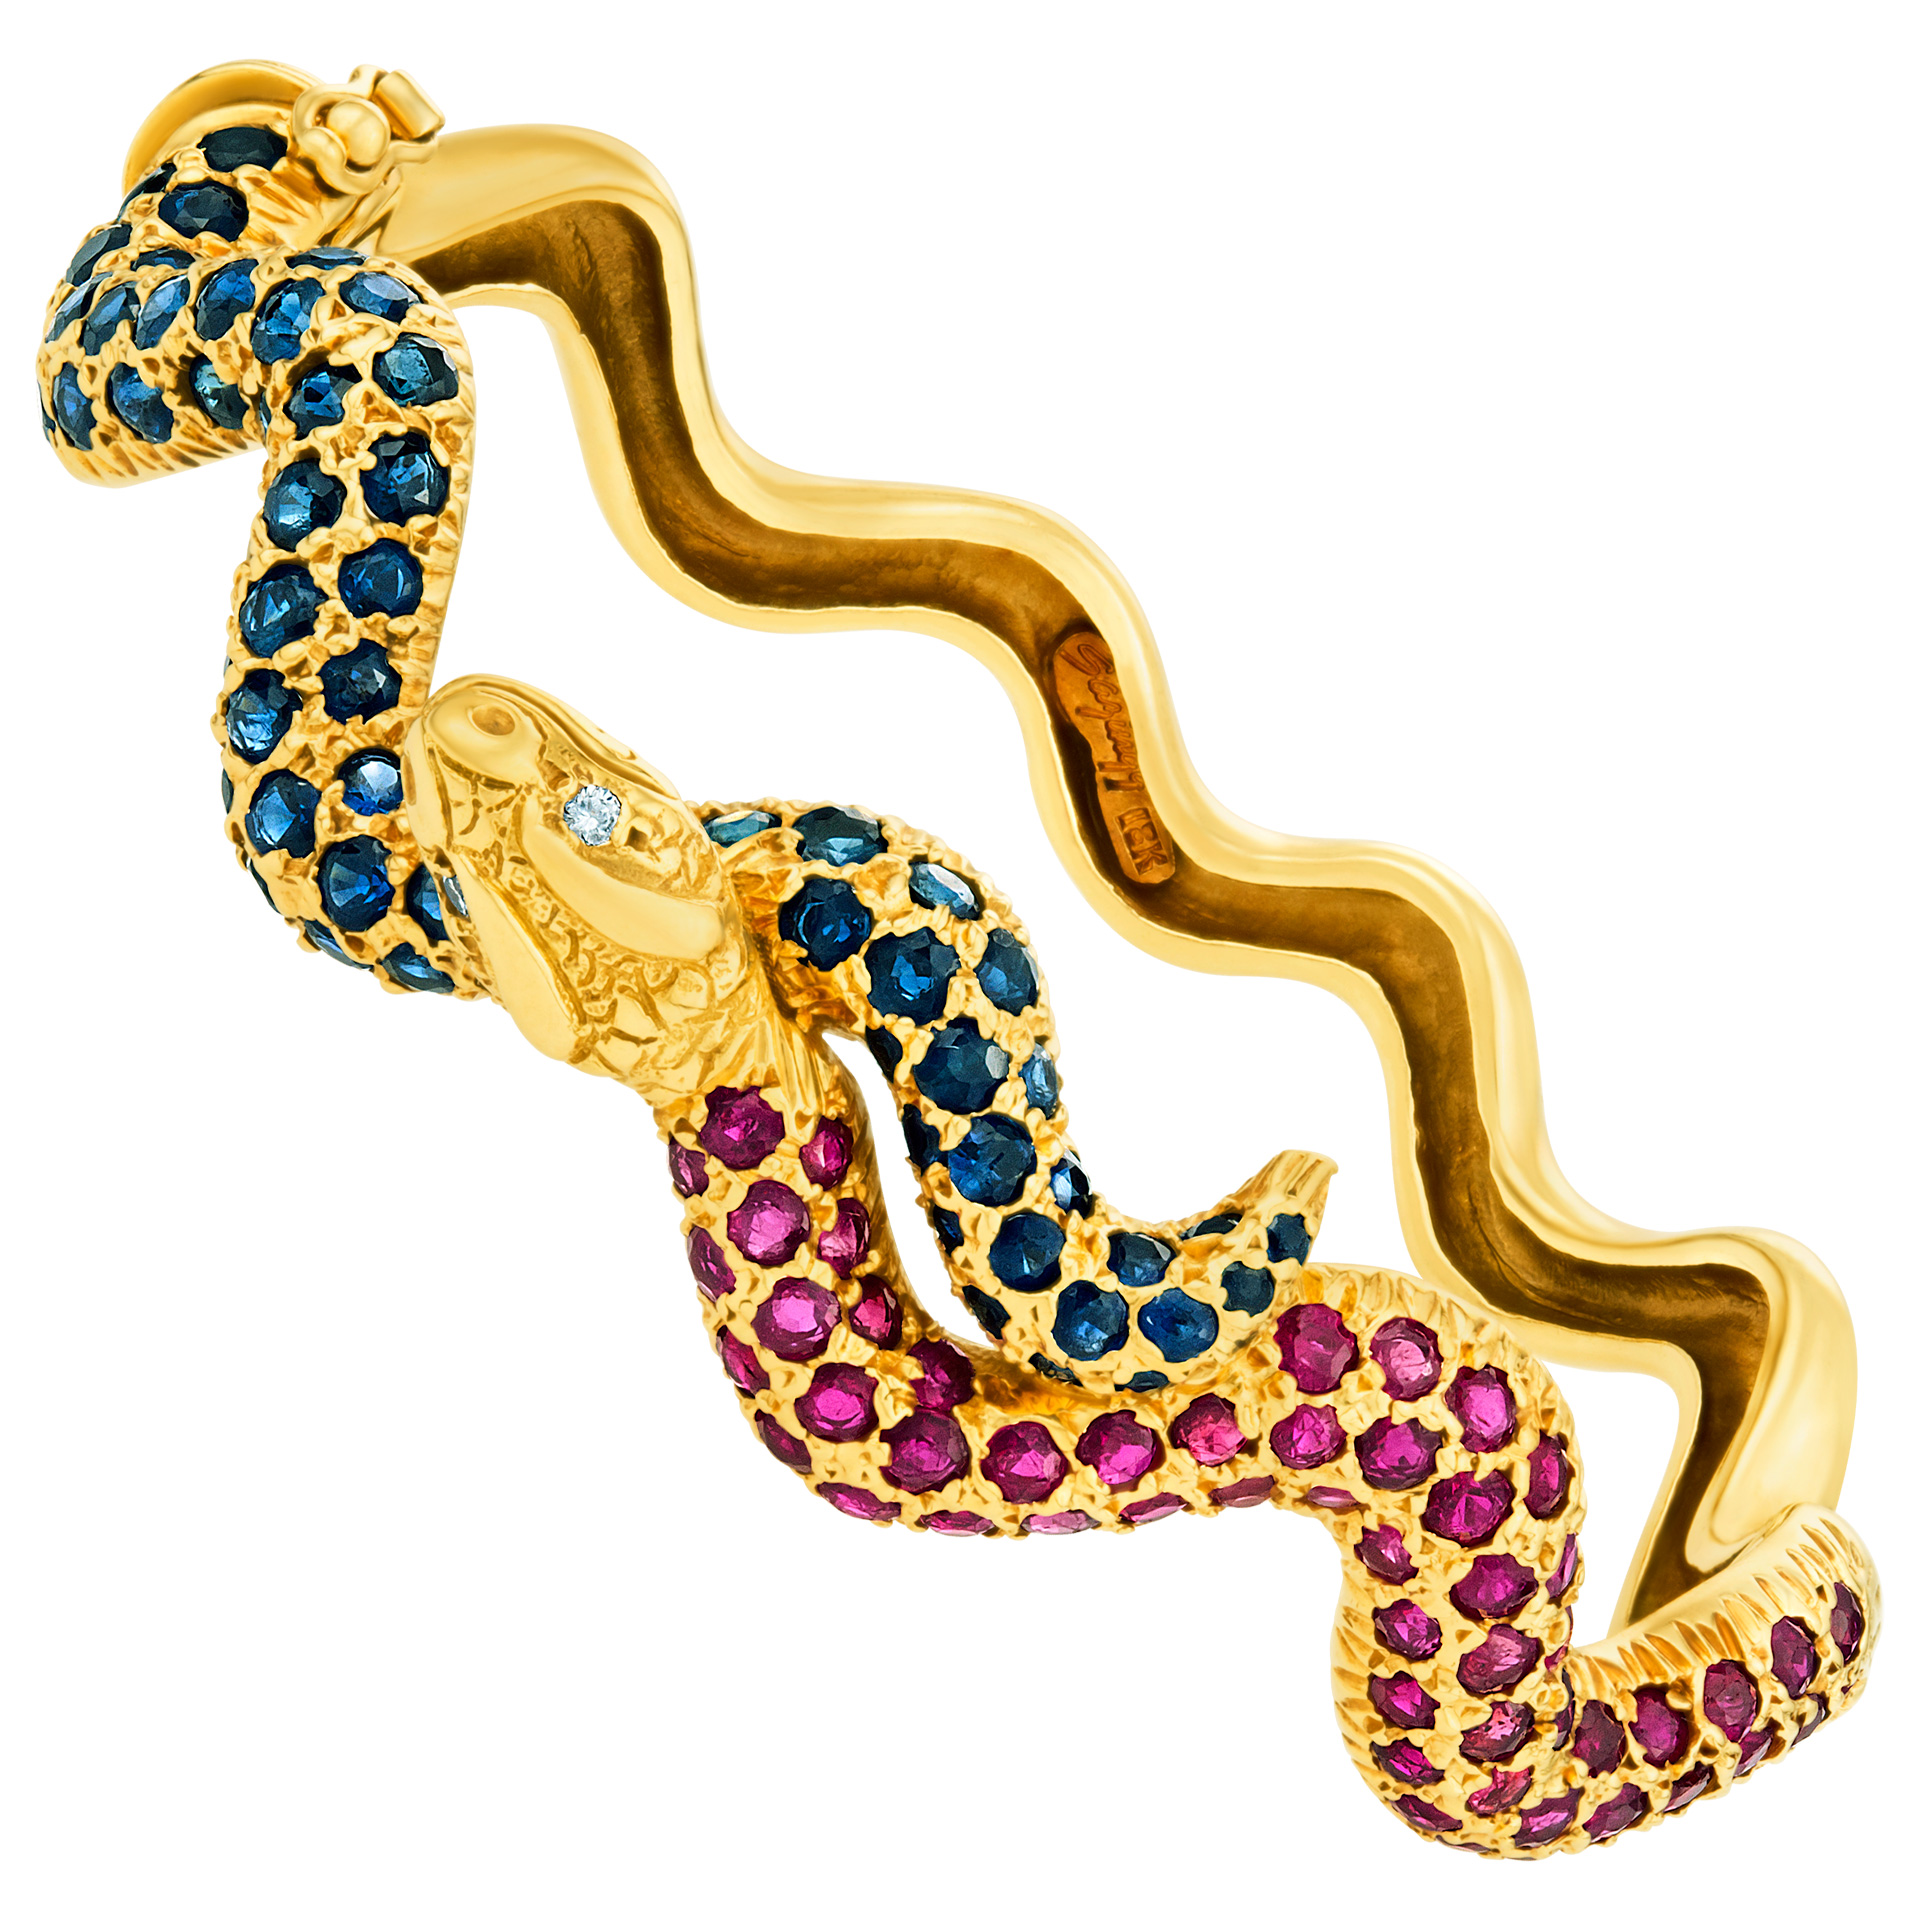 Sazingg 18k snake swirl bangle with app. 3 carats in blue sapphires and rubbies image 1